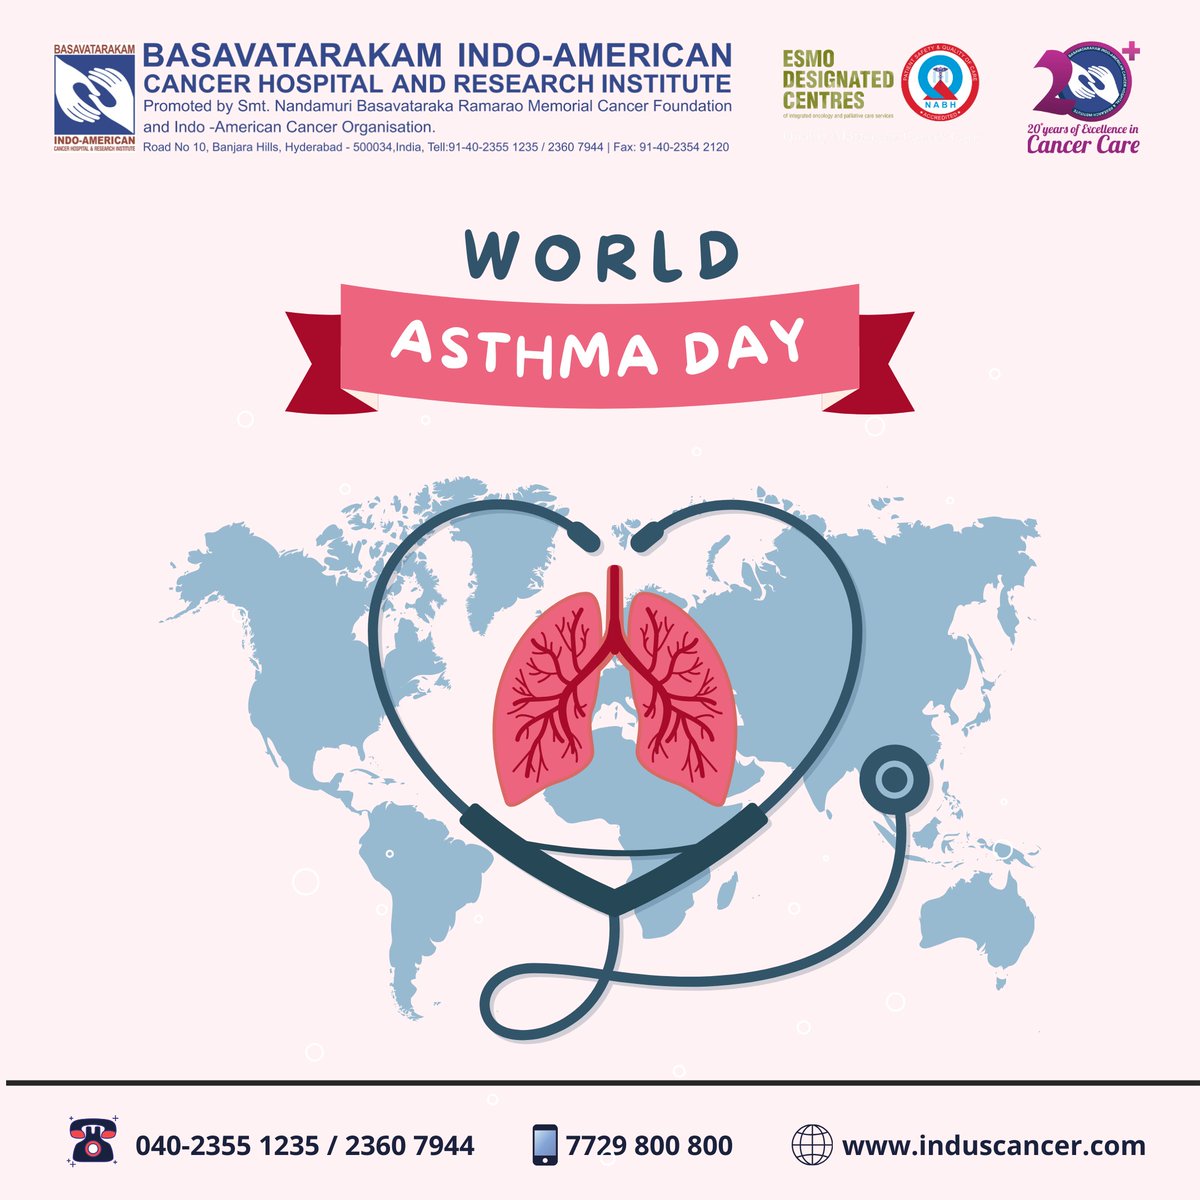 World Asthma Day: Breathing Easy Together...

What is Asthma?

Asthma is a chronic lung disease characterized by inflammation and narrowing of the airways, leading to recurrent episodes of wheezing, breathlessness, chest tightness, and coughing. (1/5)